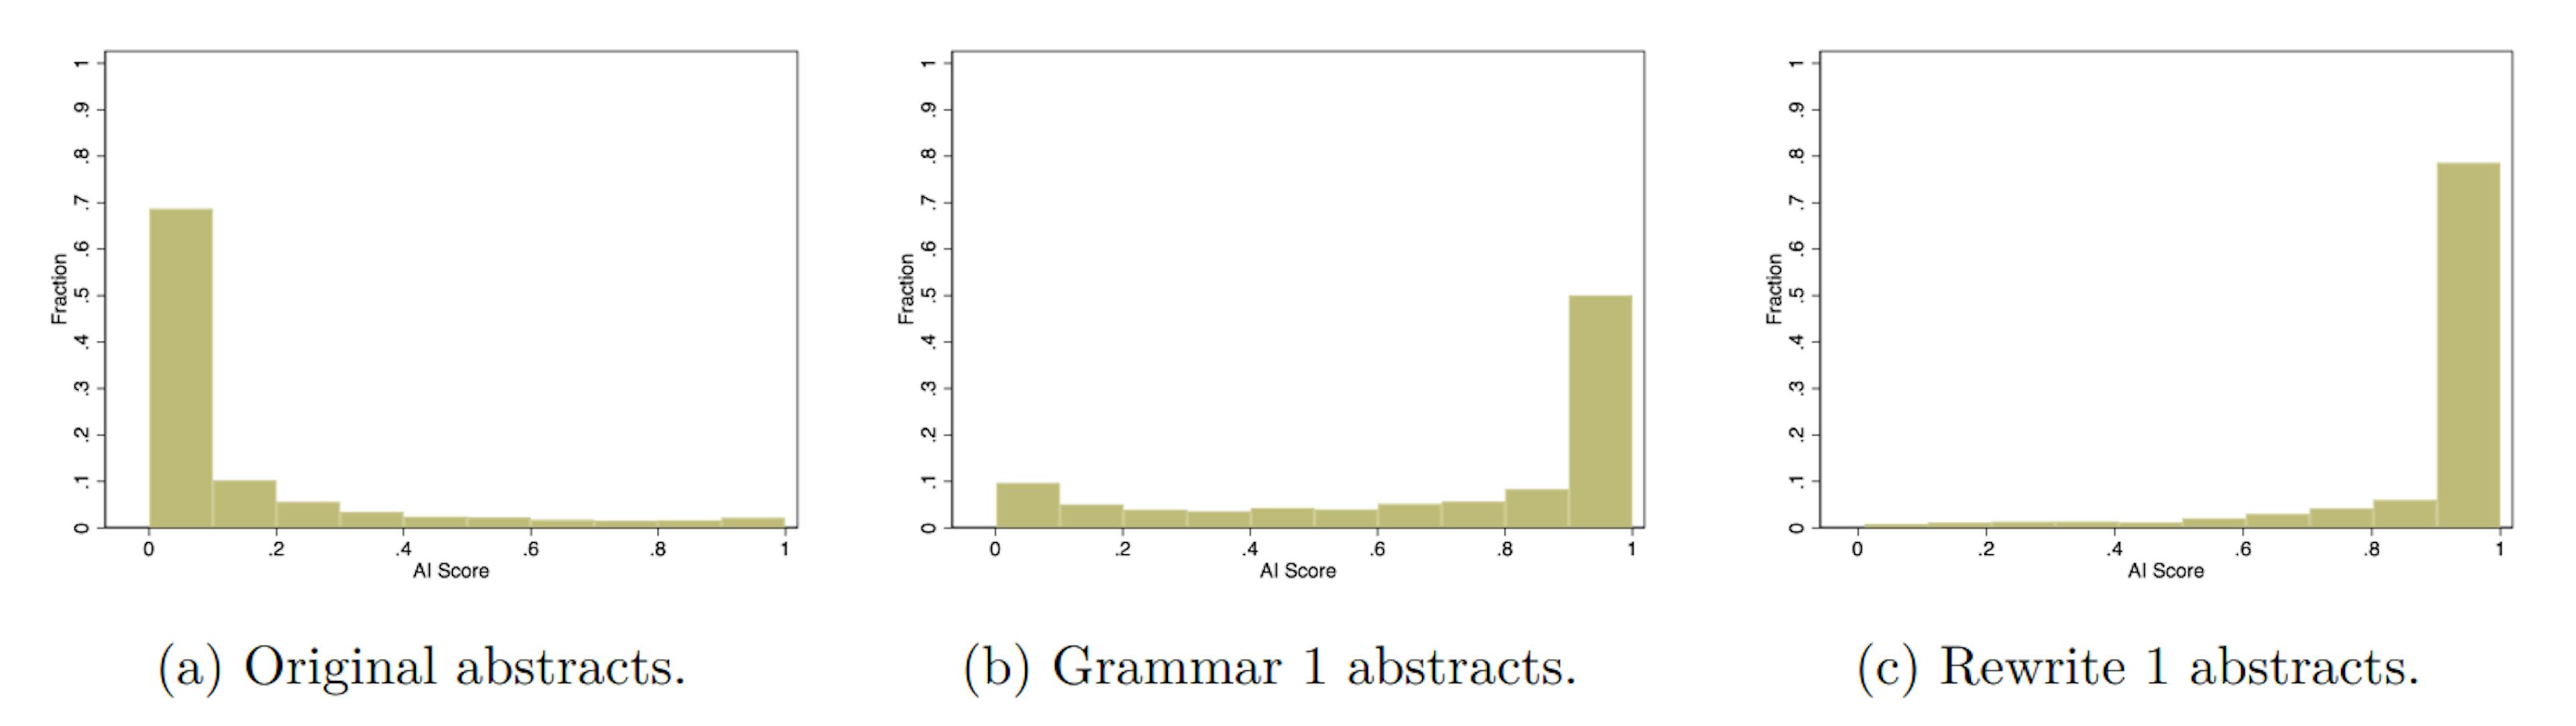 Figure 2: The distribution of AI scores for the original abstracts (a), abstracts revised using the Grammar 1 prompt (b), and abstracts revised using the Rewrite 1 prompt (c).